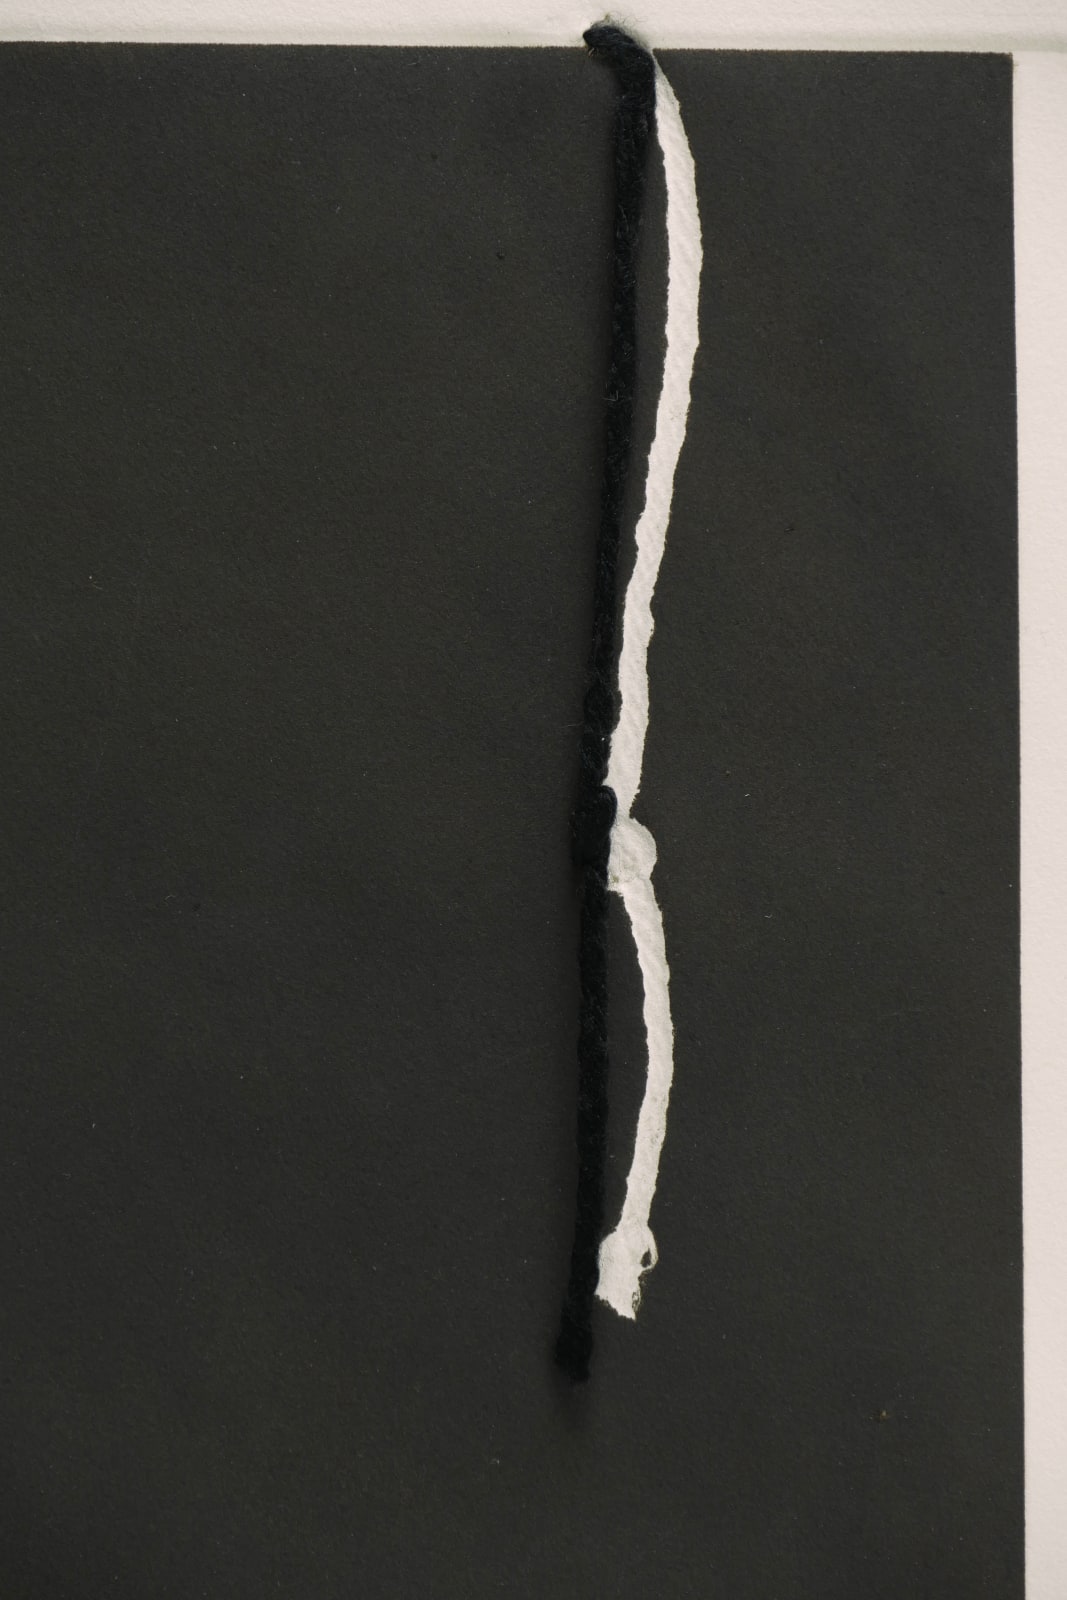 Liliana Porter, Black (string with knot), 1971